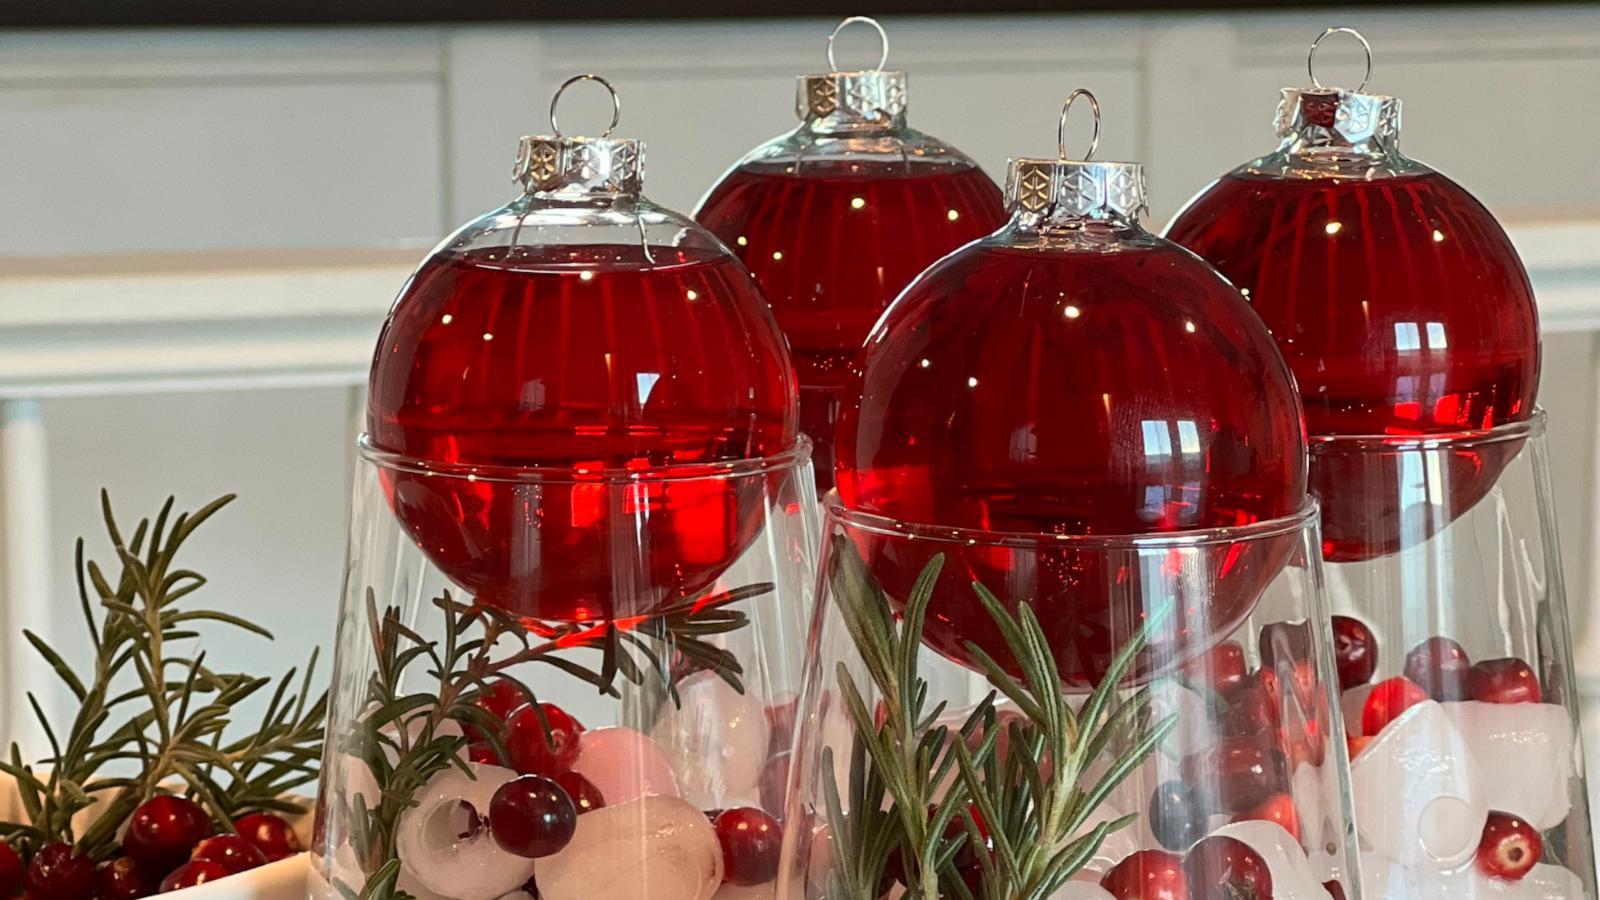 https://s.abcnews.com/images/GMA/holiday-ornament-drink_1701277448099_hpMain_16x9_1600.jpg